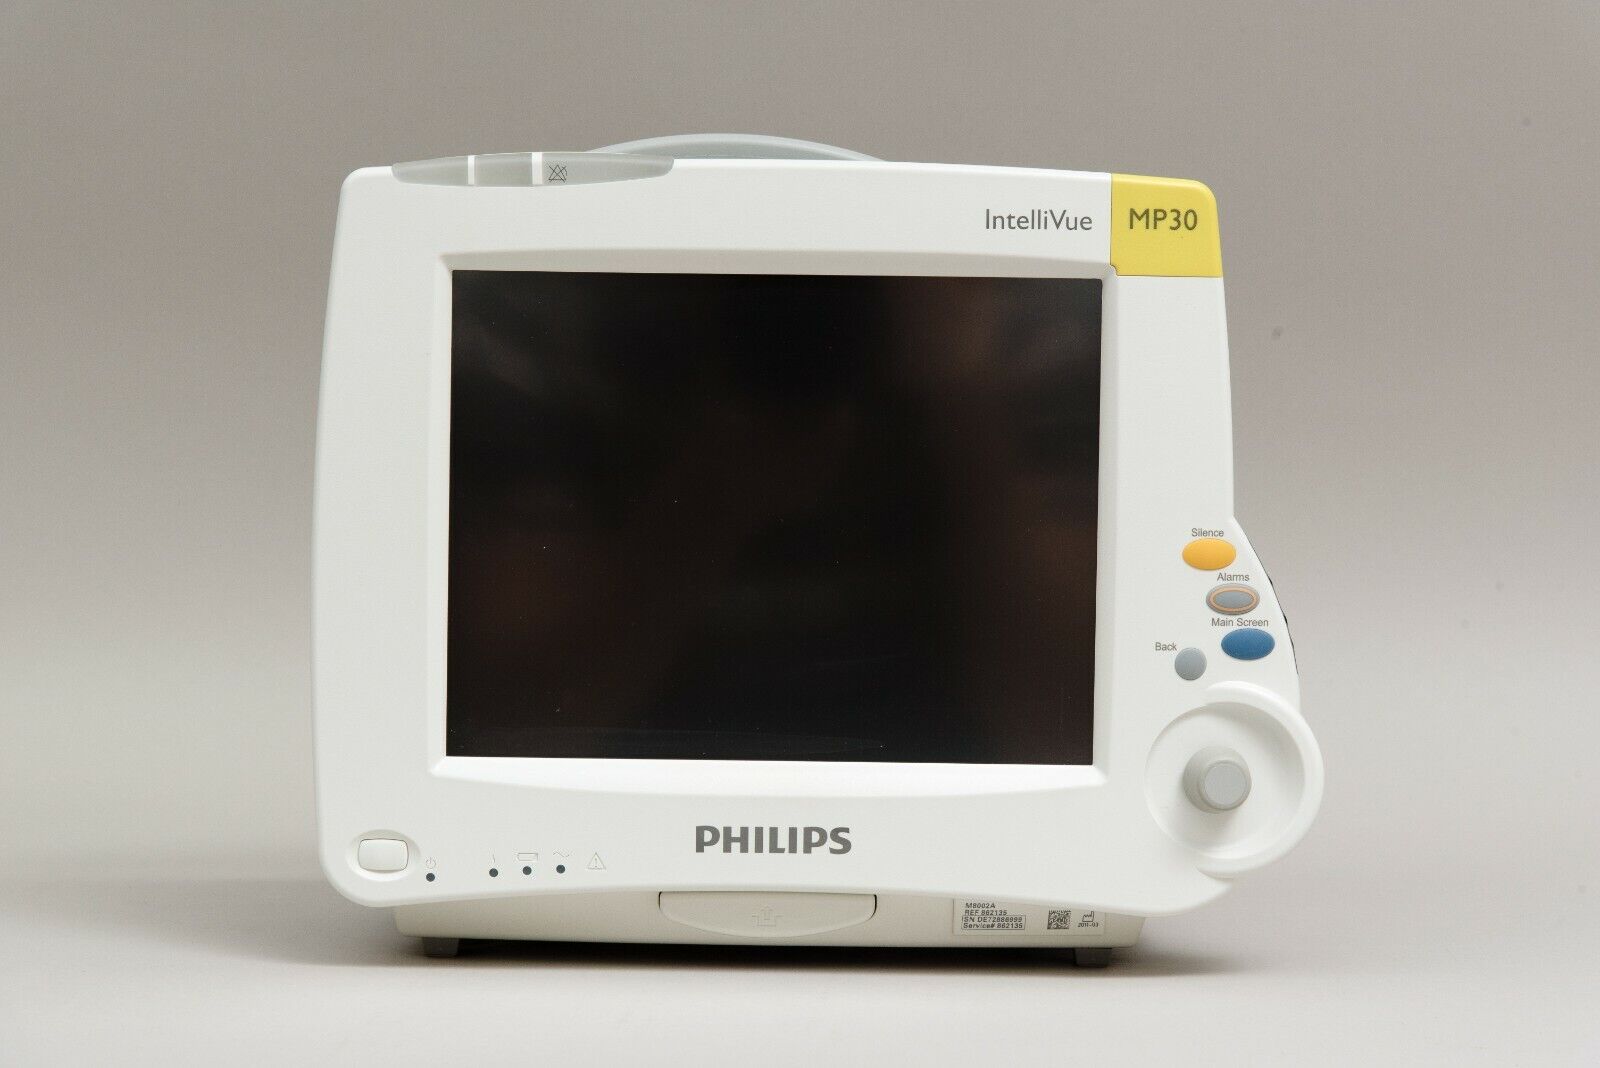 Lot of 5 Refurbished Philips IntelliVue MP30 Monitor  Available at Simon Medical Philips MP30 - фотография #2